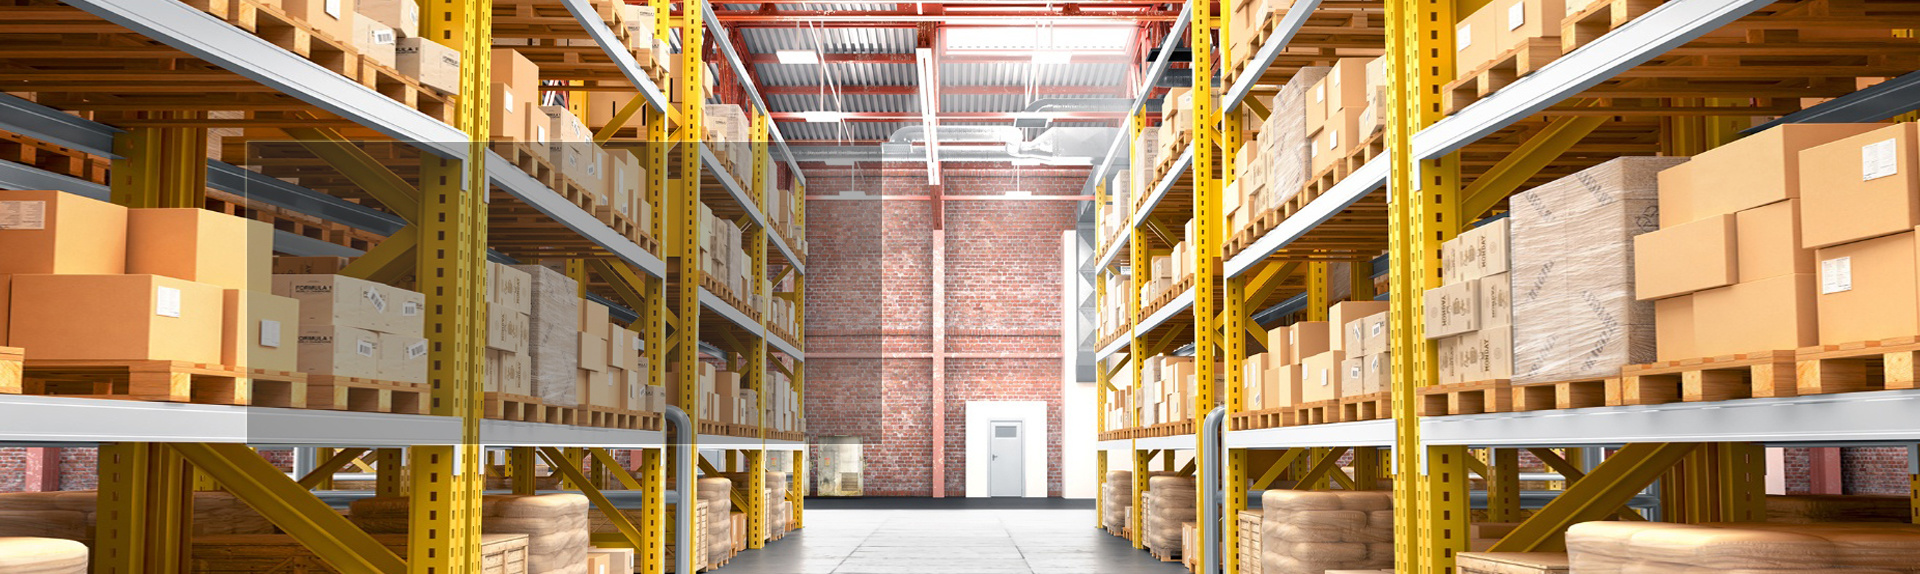 Factory Smart Light Solution Reduces Work Errors for Employees